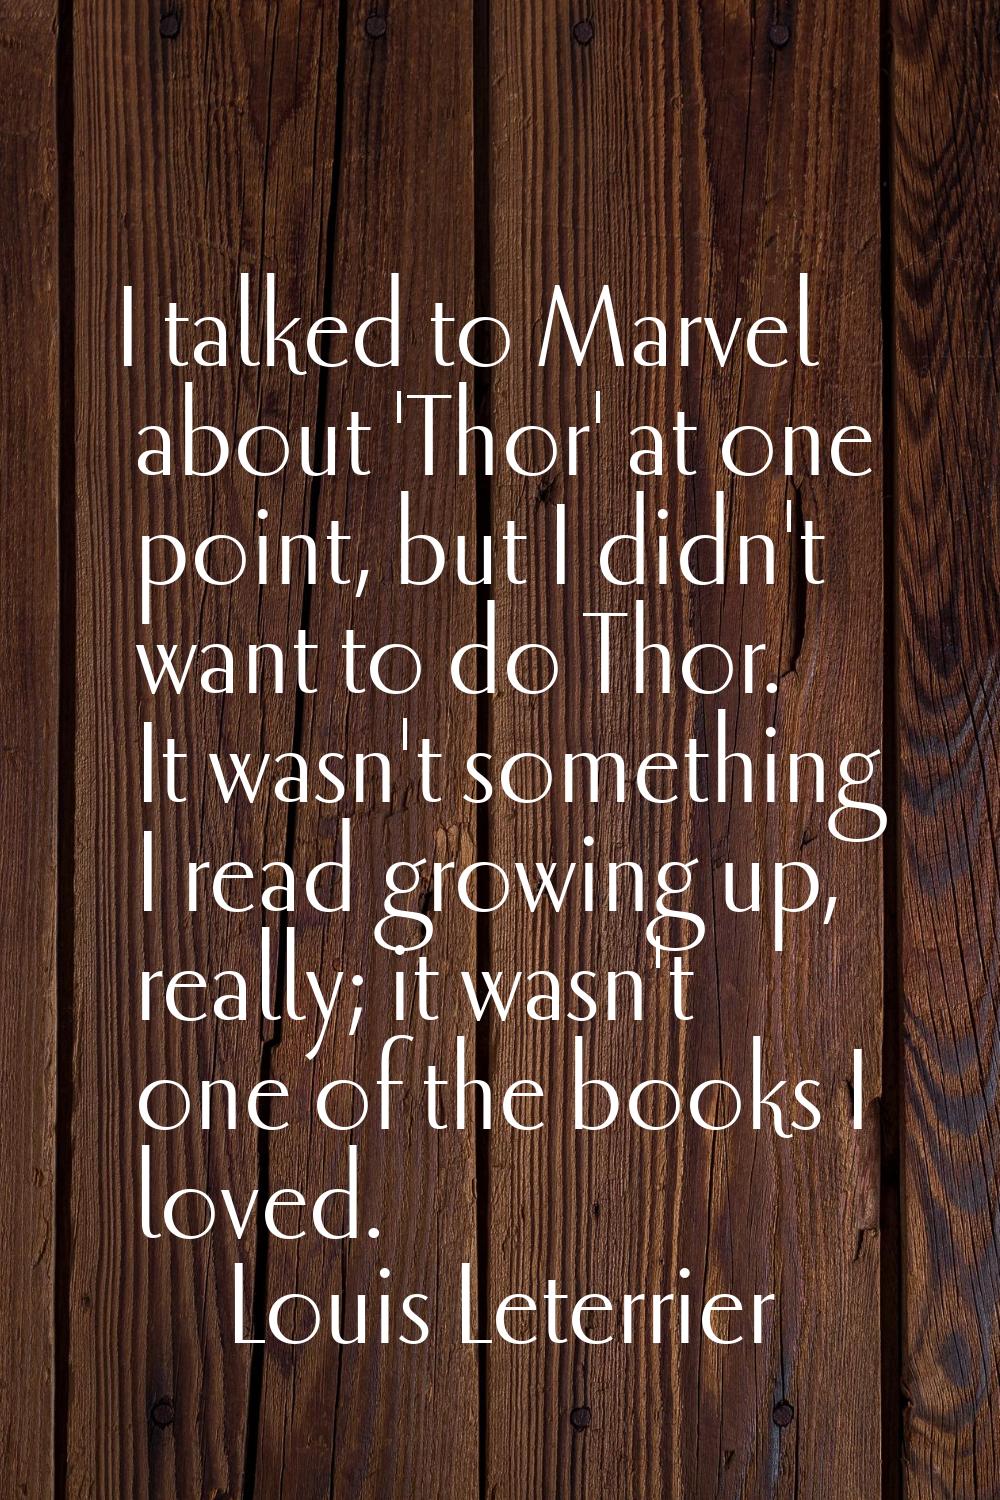 I talked to Marvel about 'Thor' at one point, but I didn't want to do Thor. It wasn't something I r